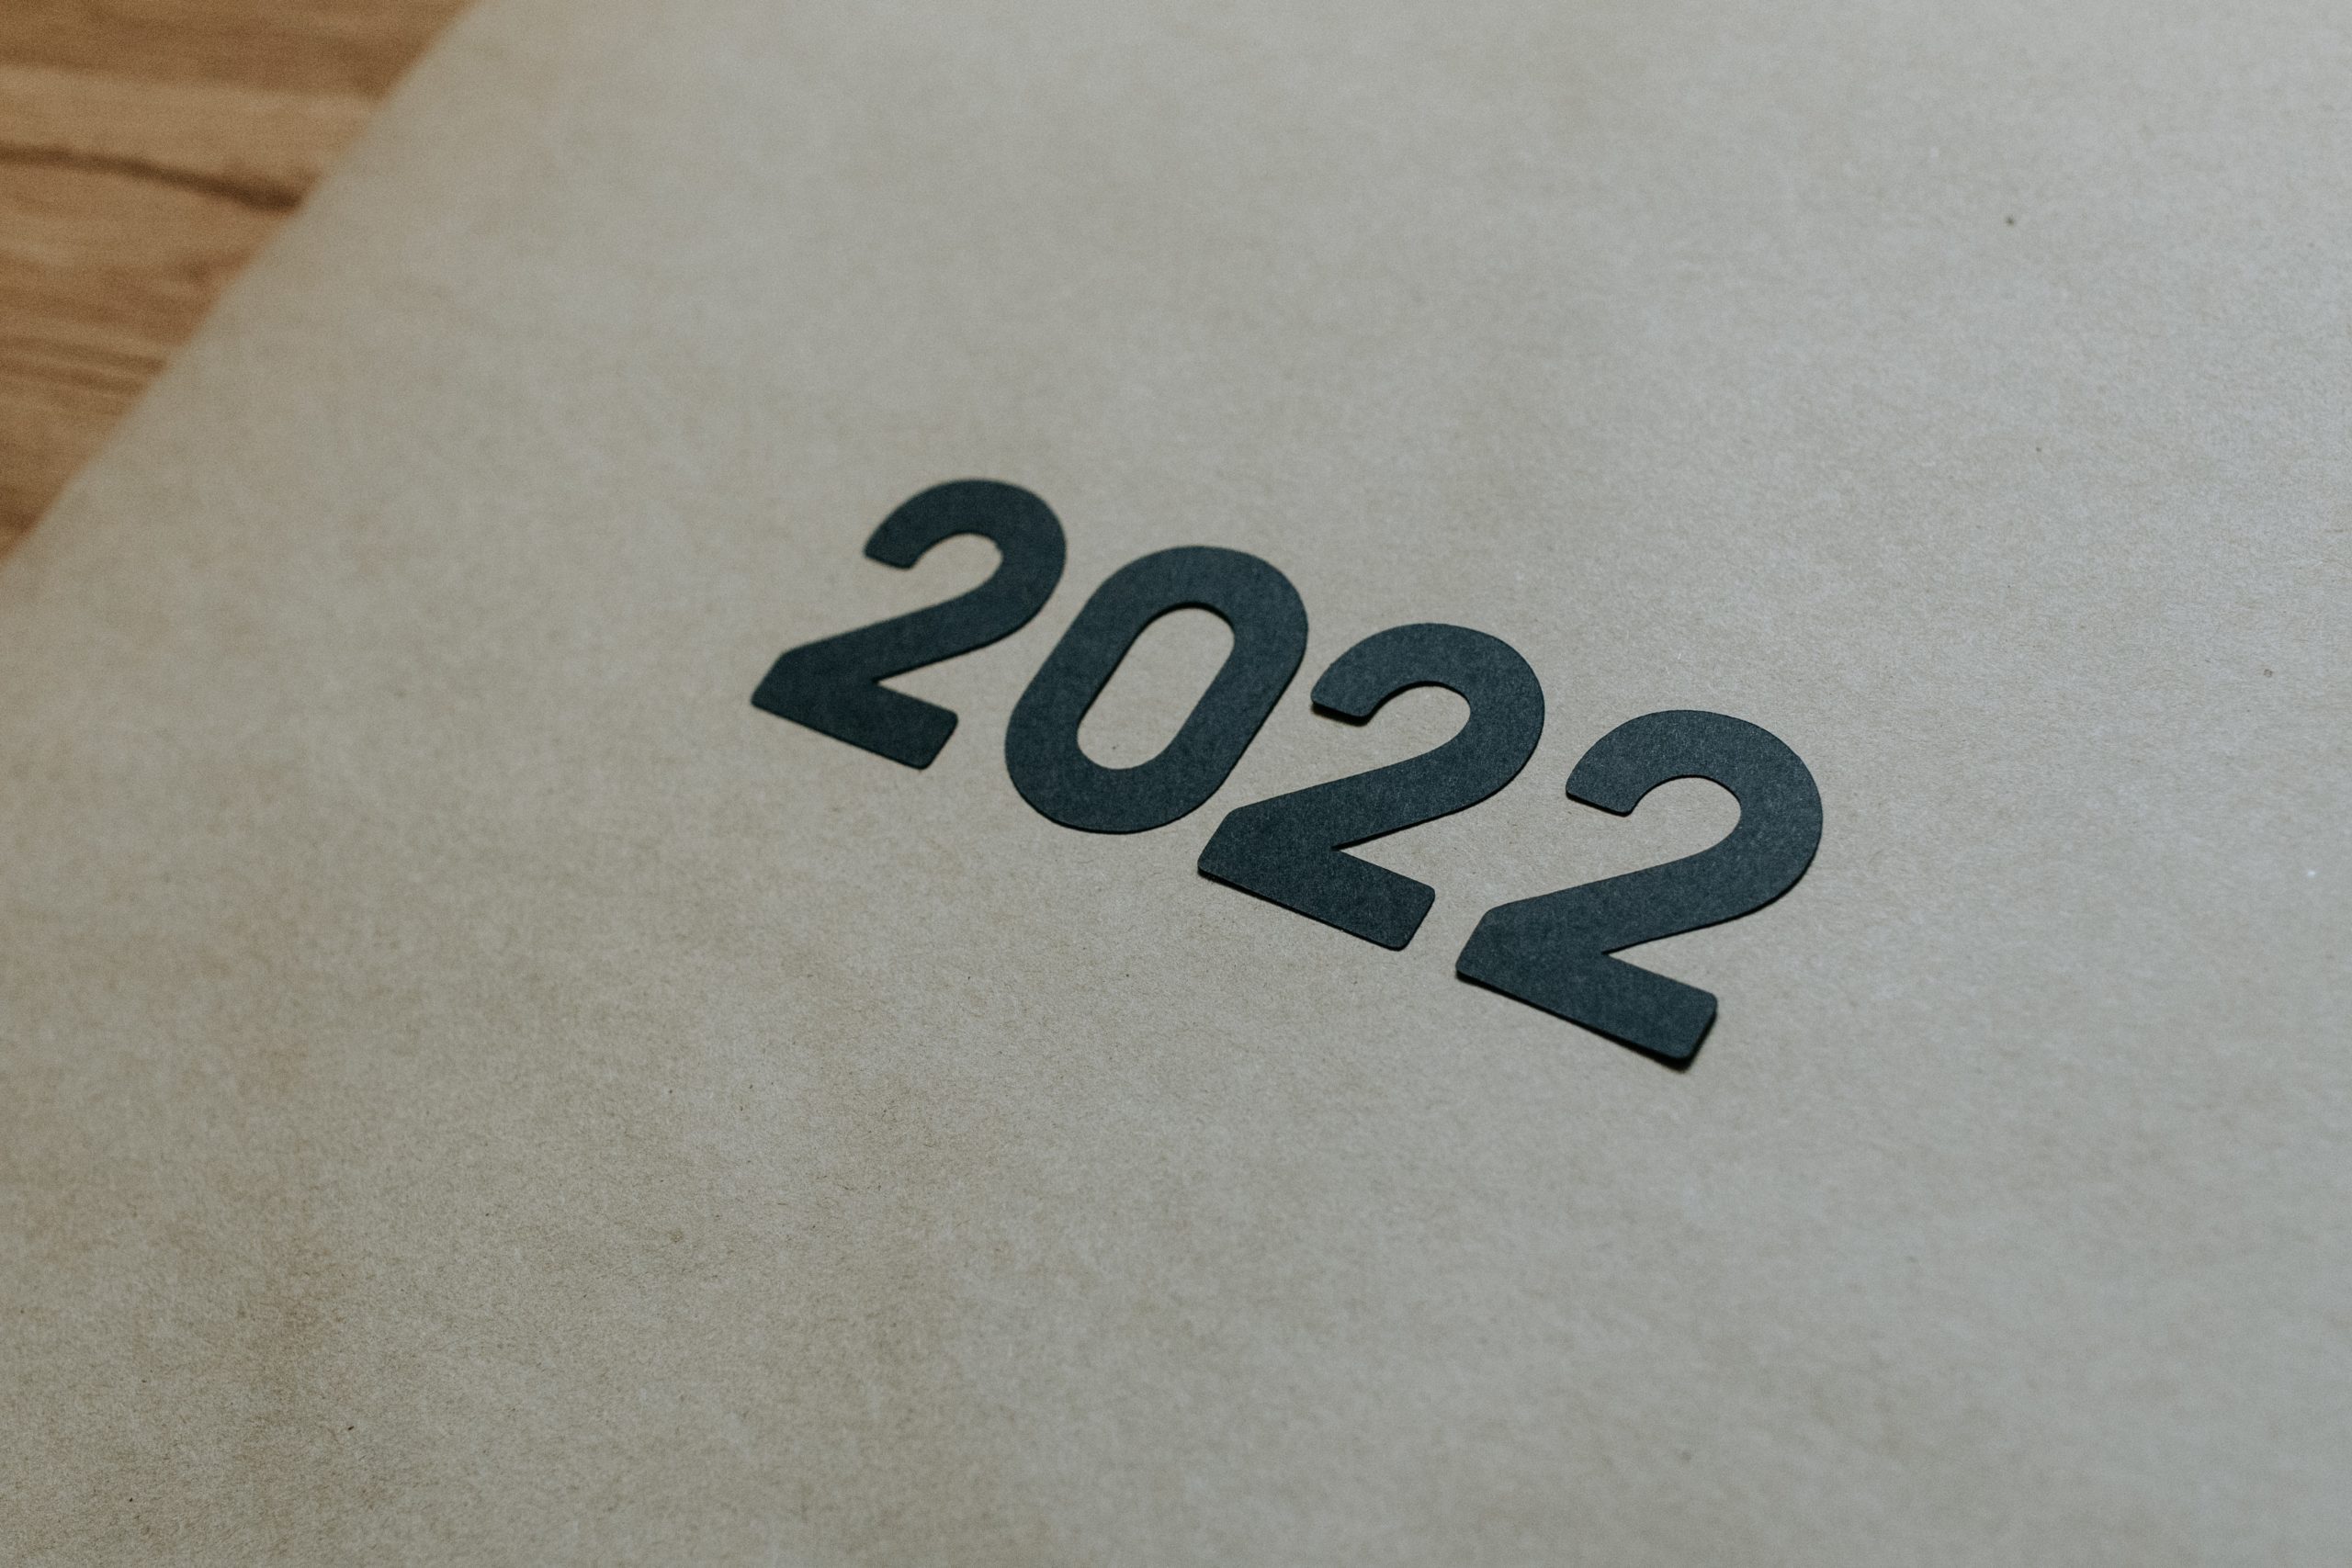 Block numbers 2022 appear on a paper